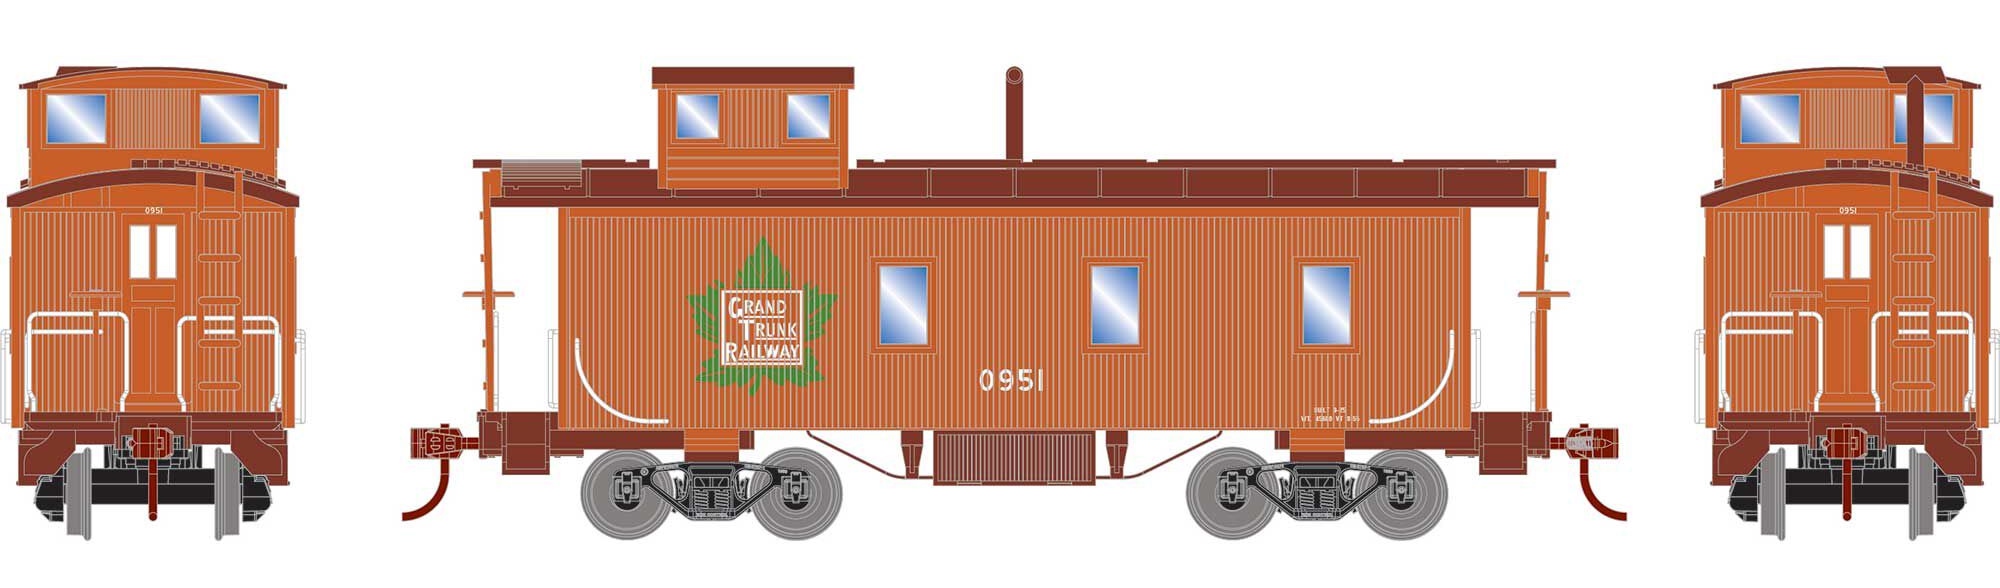 Athearn Roundhouse HO RND11717 30' 3-Window Caboose Grand Trunk Western GTW #0951